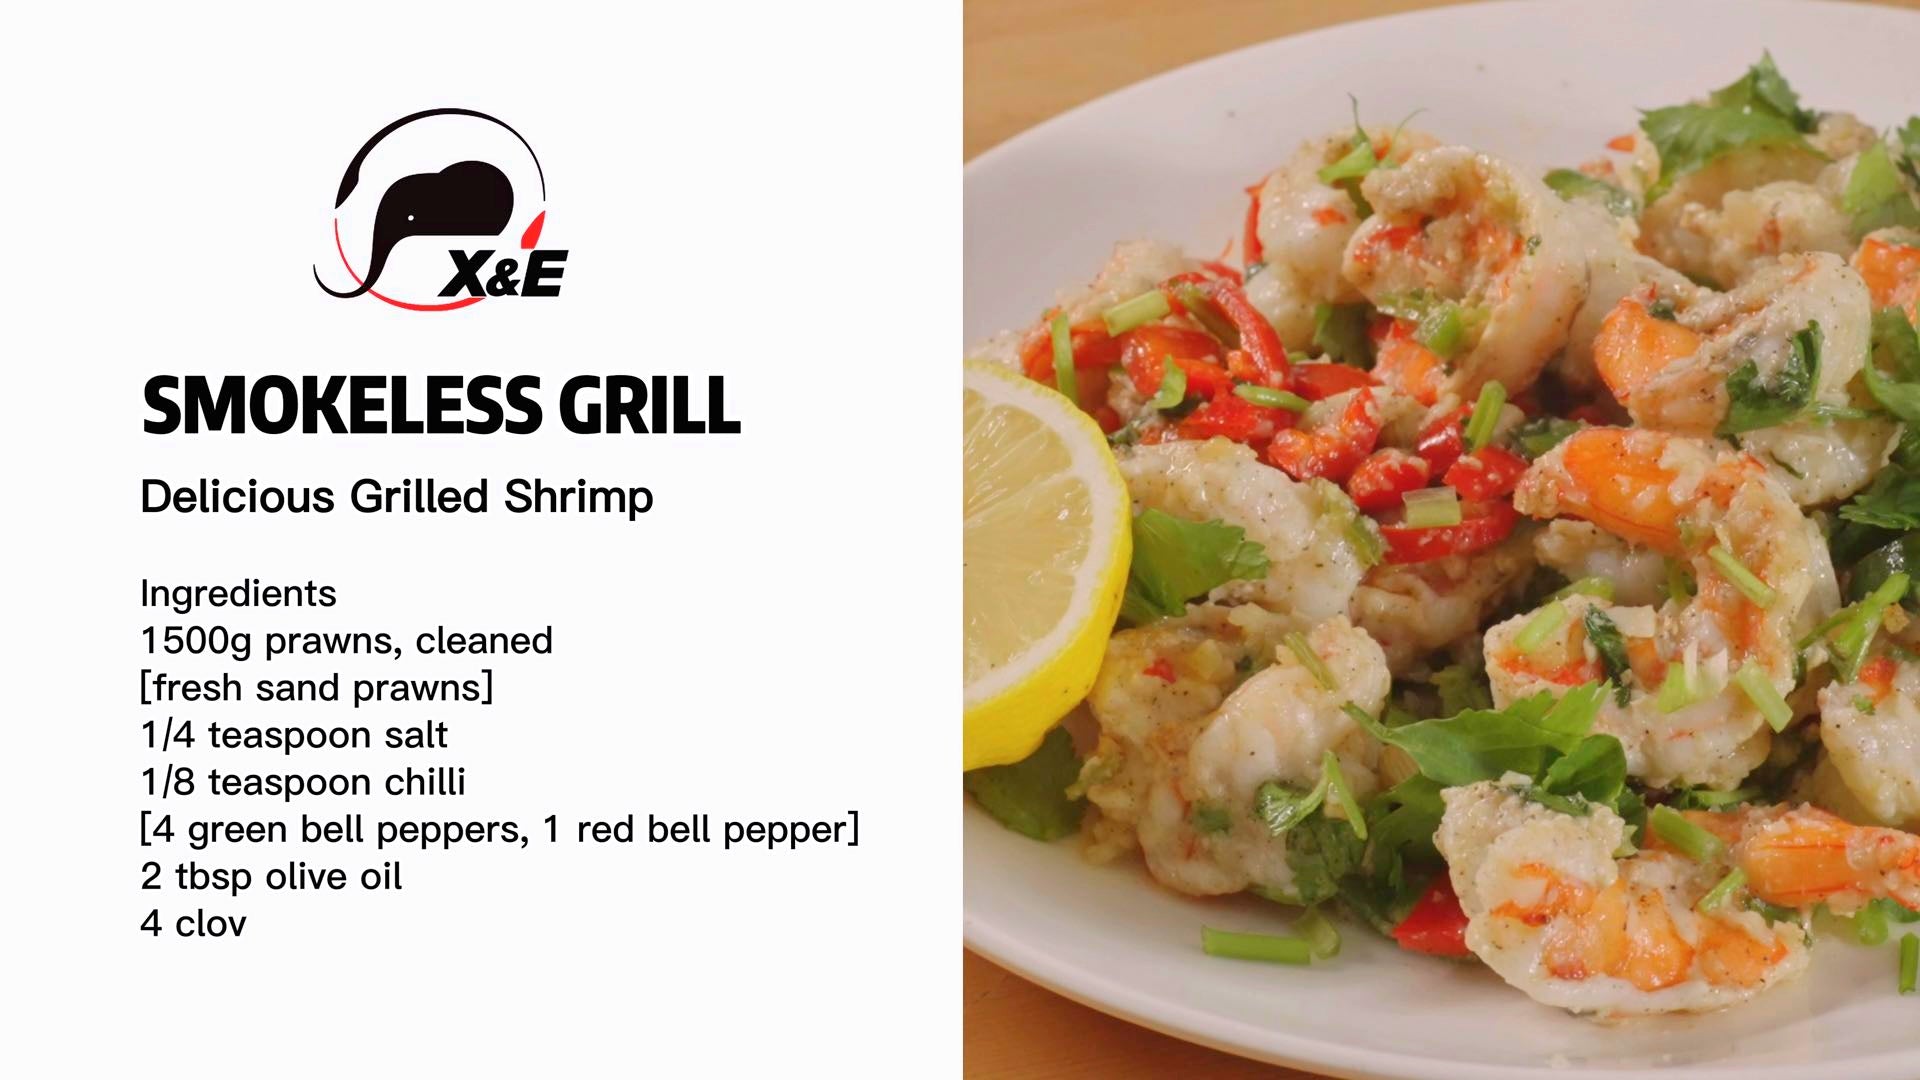 If you love the taste of perfectly grilled shrimp, then the X&E Smokeless Grill is your ultimate kitchen companion.